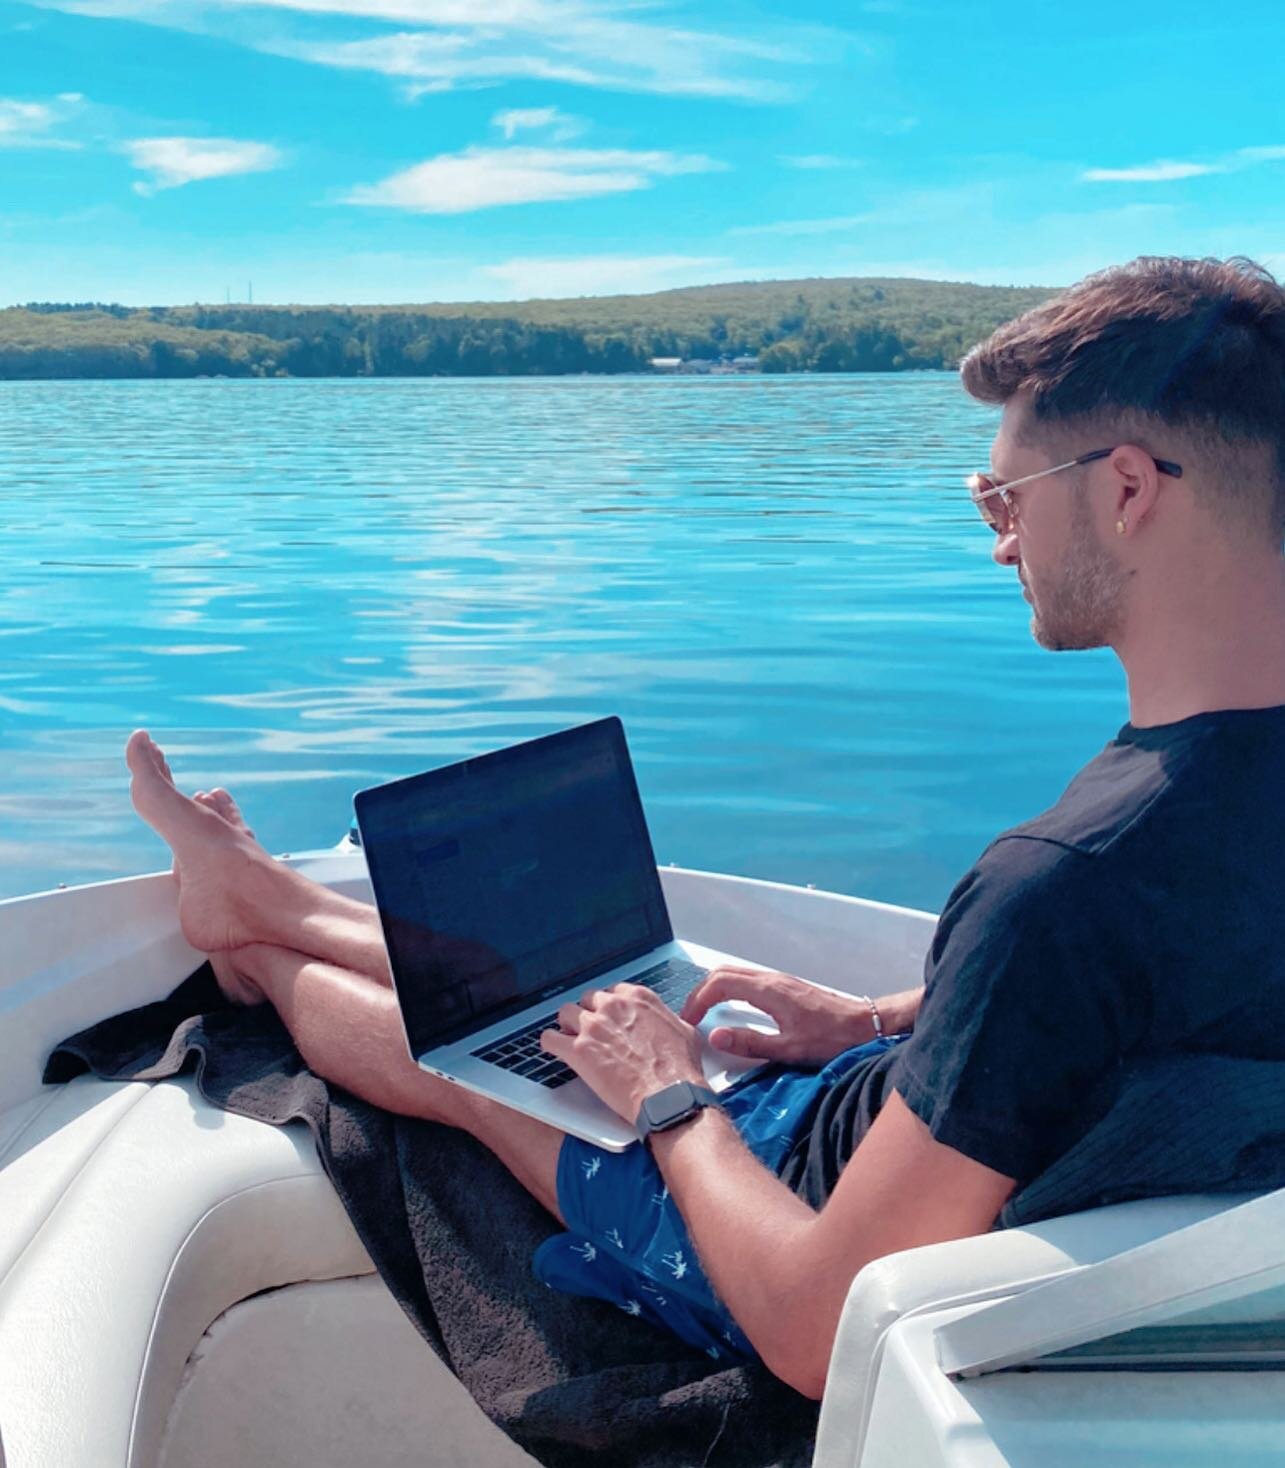 Working from home, boat edition!